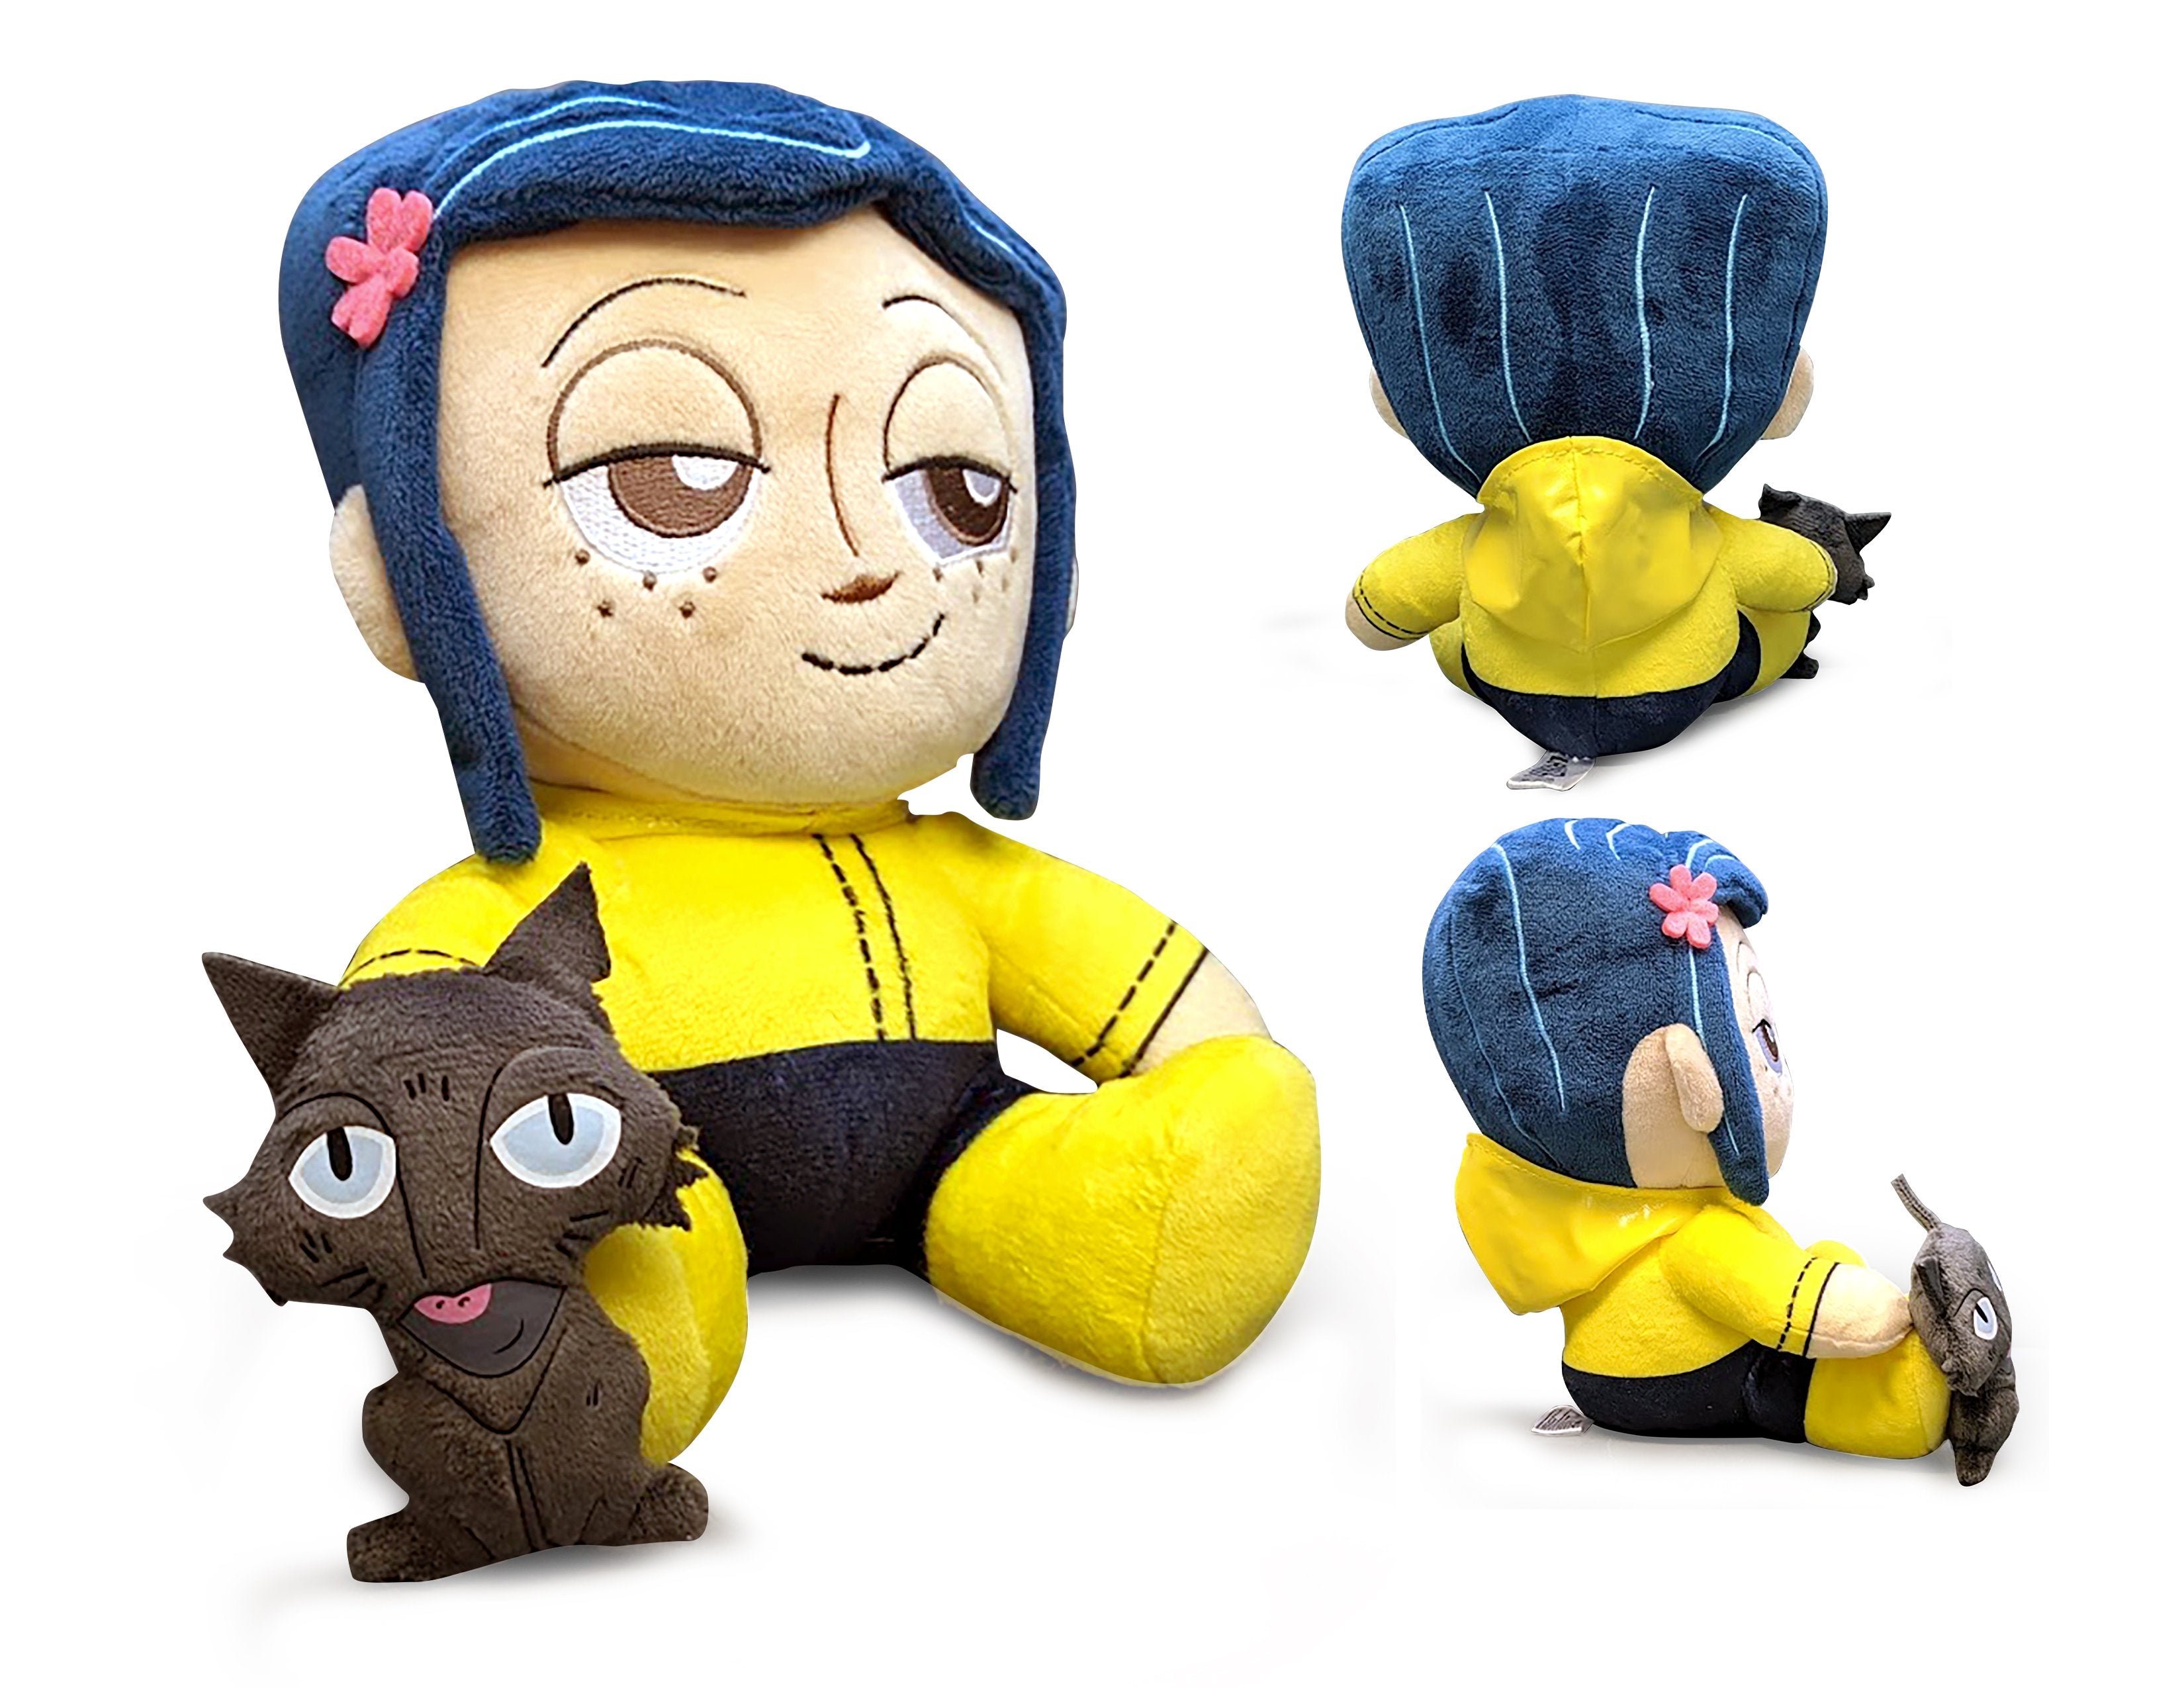 Coraline with Button Eyes Life-Size Plush Doll (PRE-ORDER) – NECA